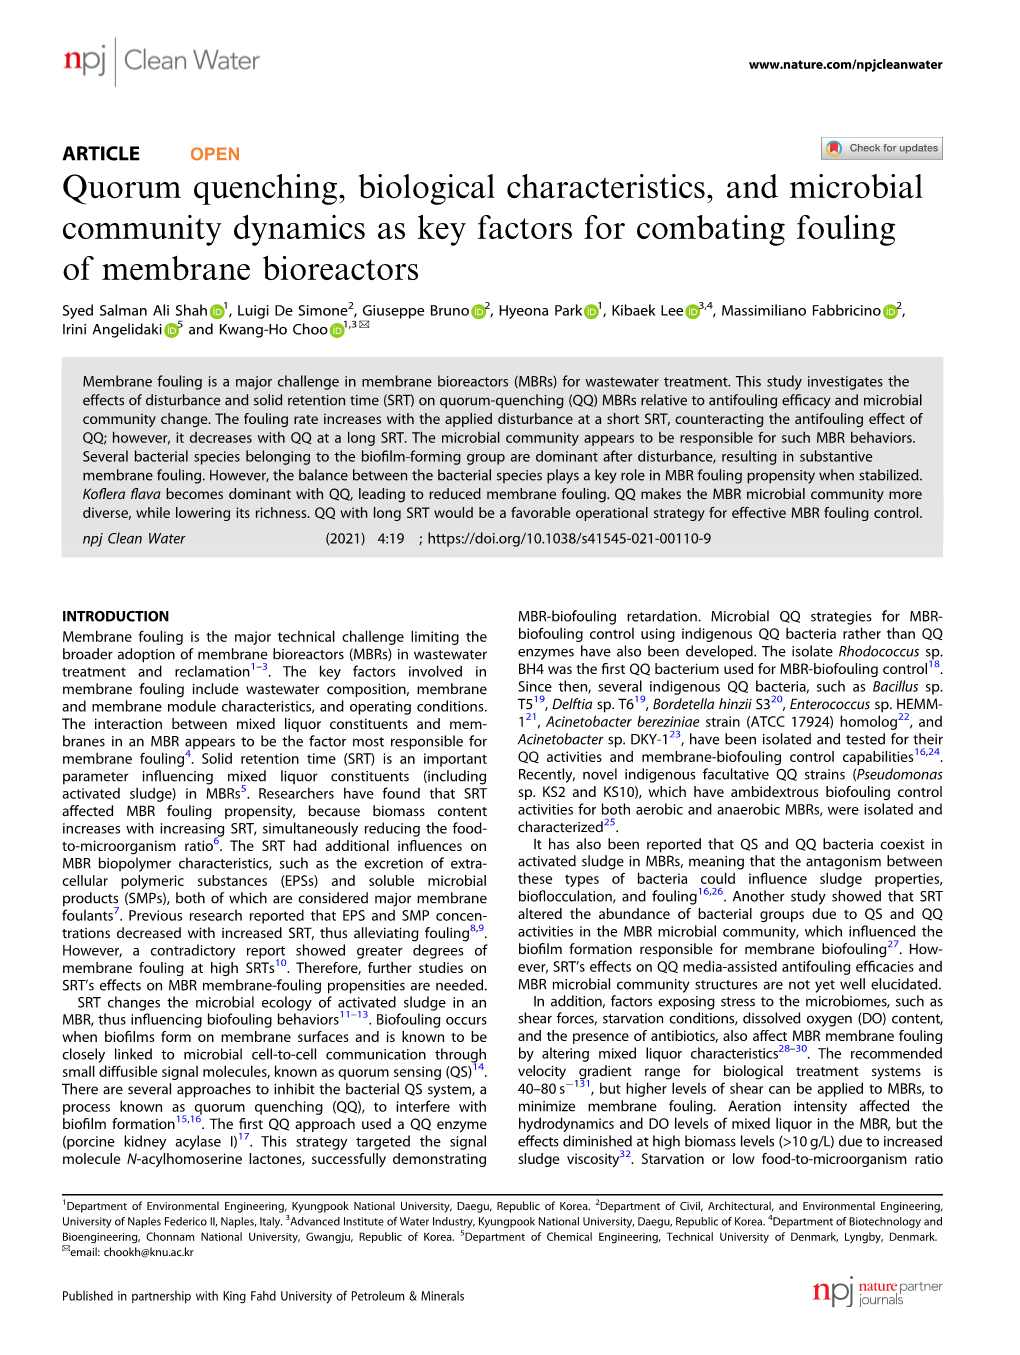 Quorum Quenching, Biological Characteristics, and Microbial Community Dynamics As Key Factors for Combating Fouling of Membrane Bioreactors